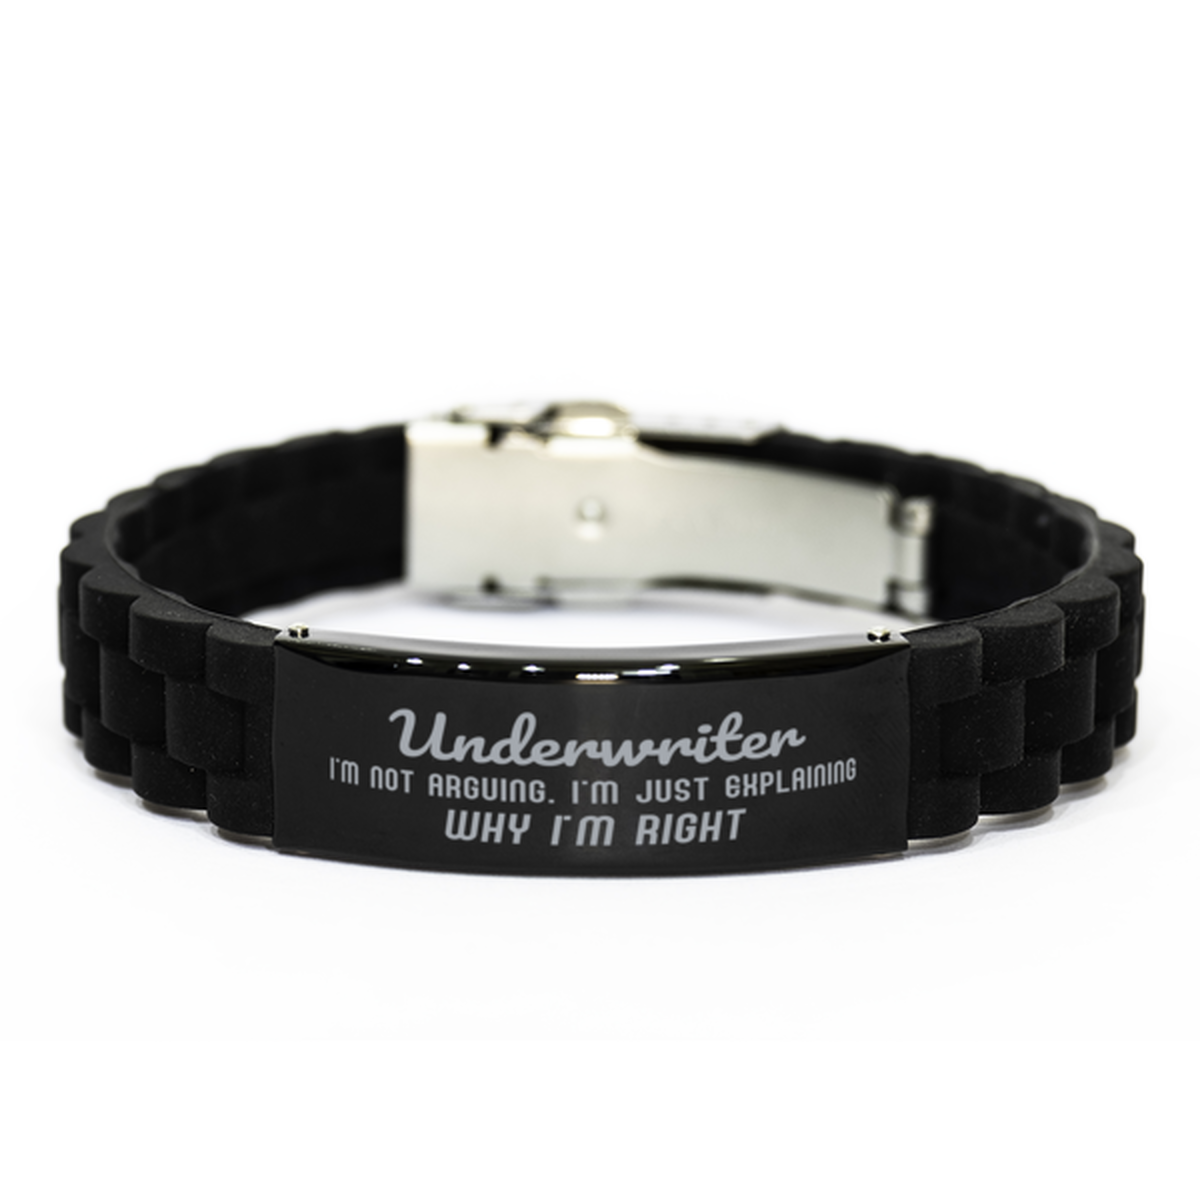 Underwriter I'm not Arguing. I'm Just Explaining Why I'm RIGHT Black Glidelock Clasp Bracelet, Funny Saying Quote Underwriter Gifts For Underwriter Graduation Birthday Christmas Gifts for Men Women Coworker